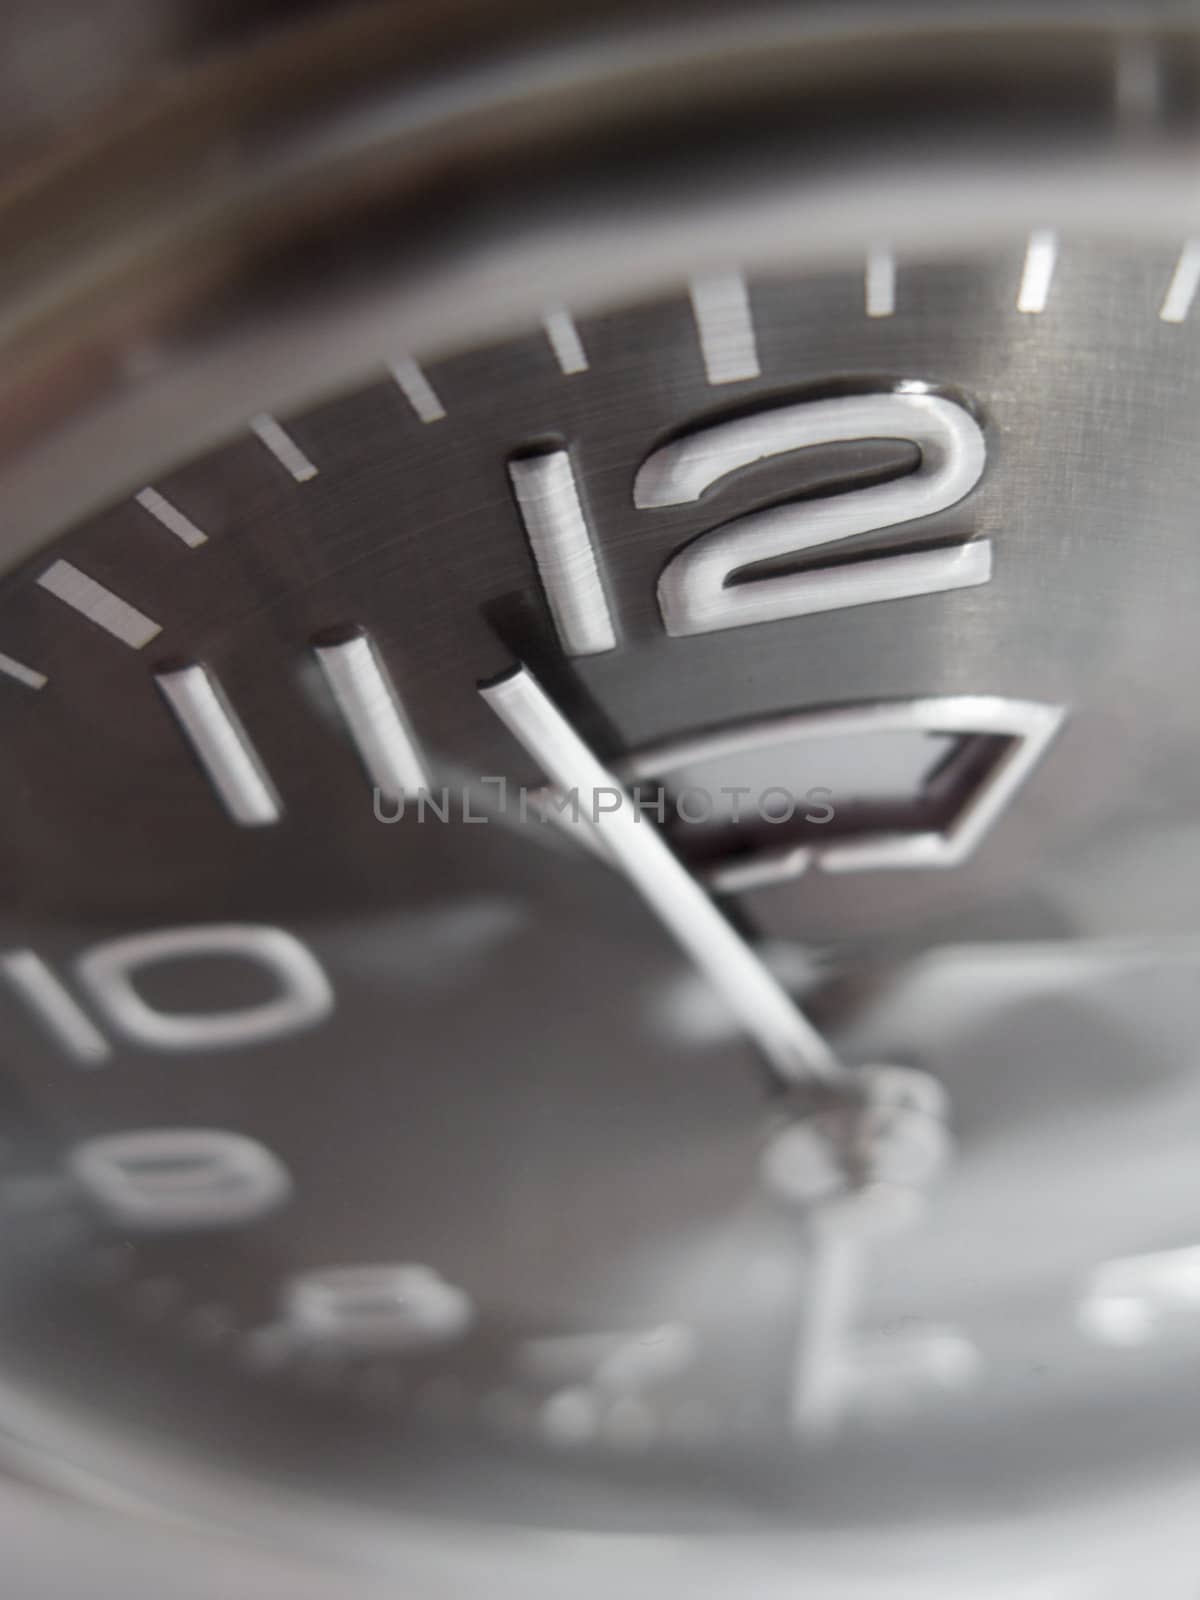 Chrome Clock Close-Up by alister